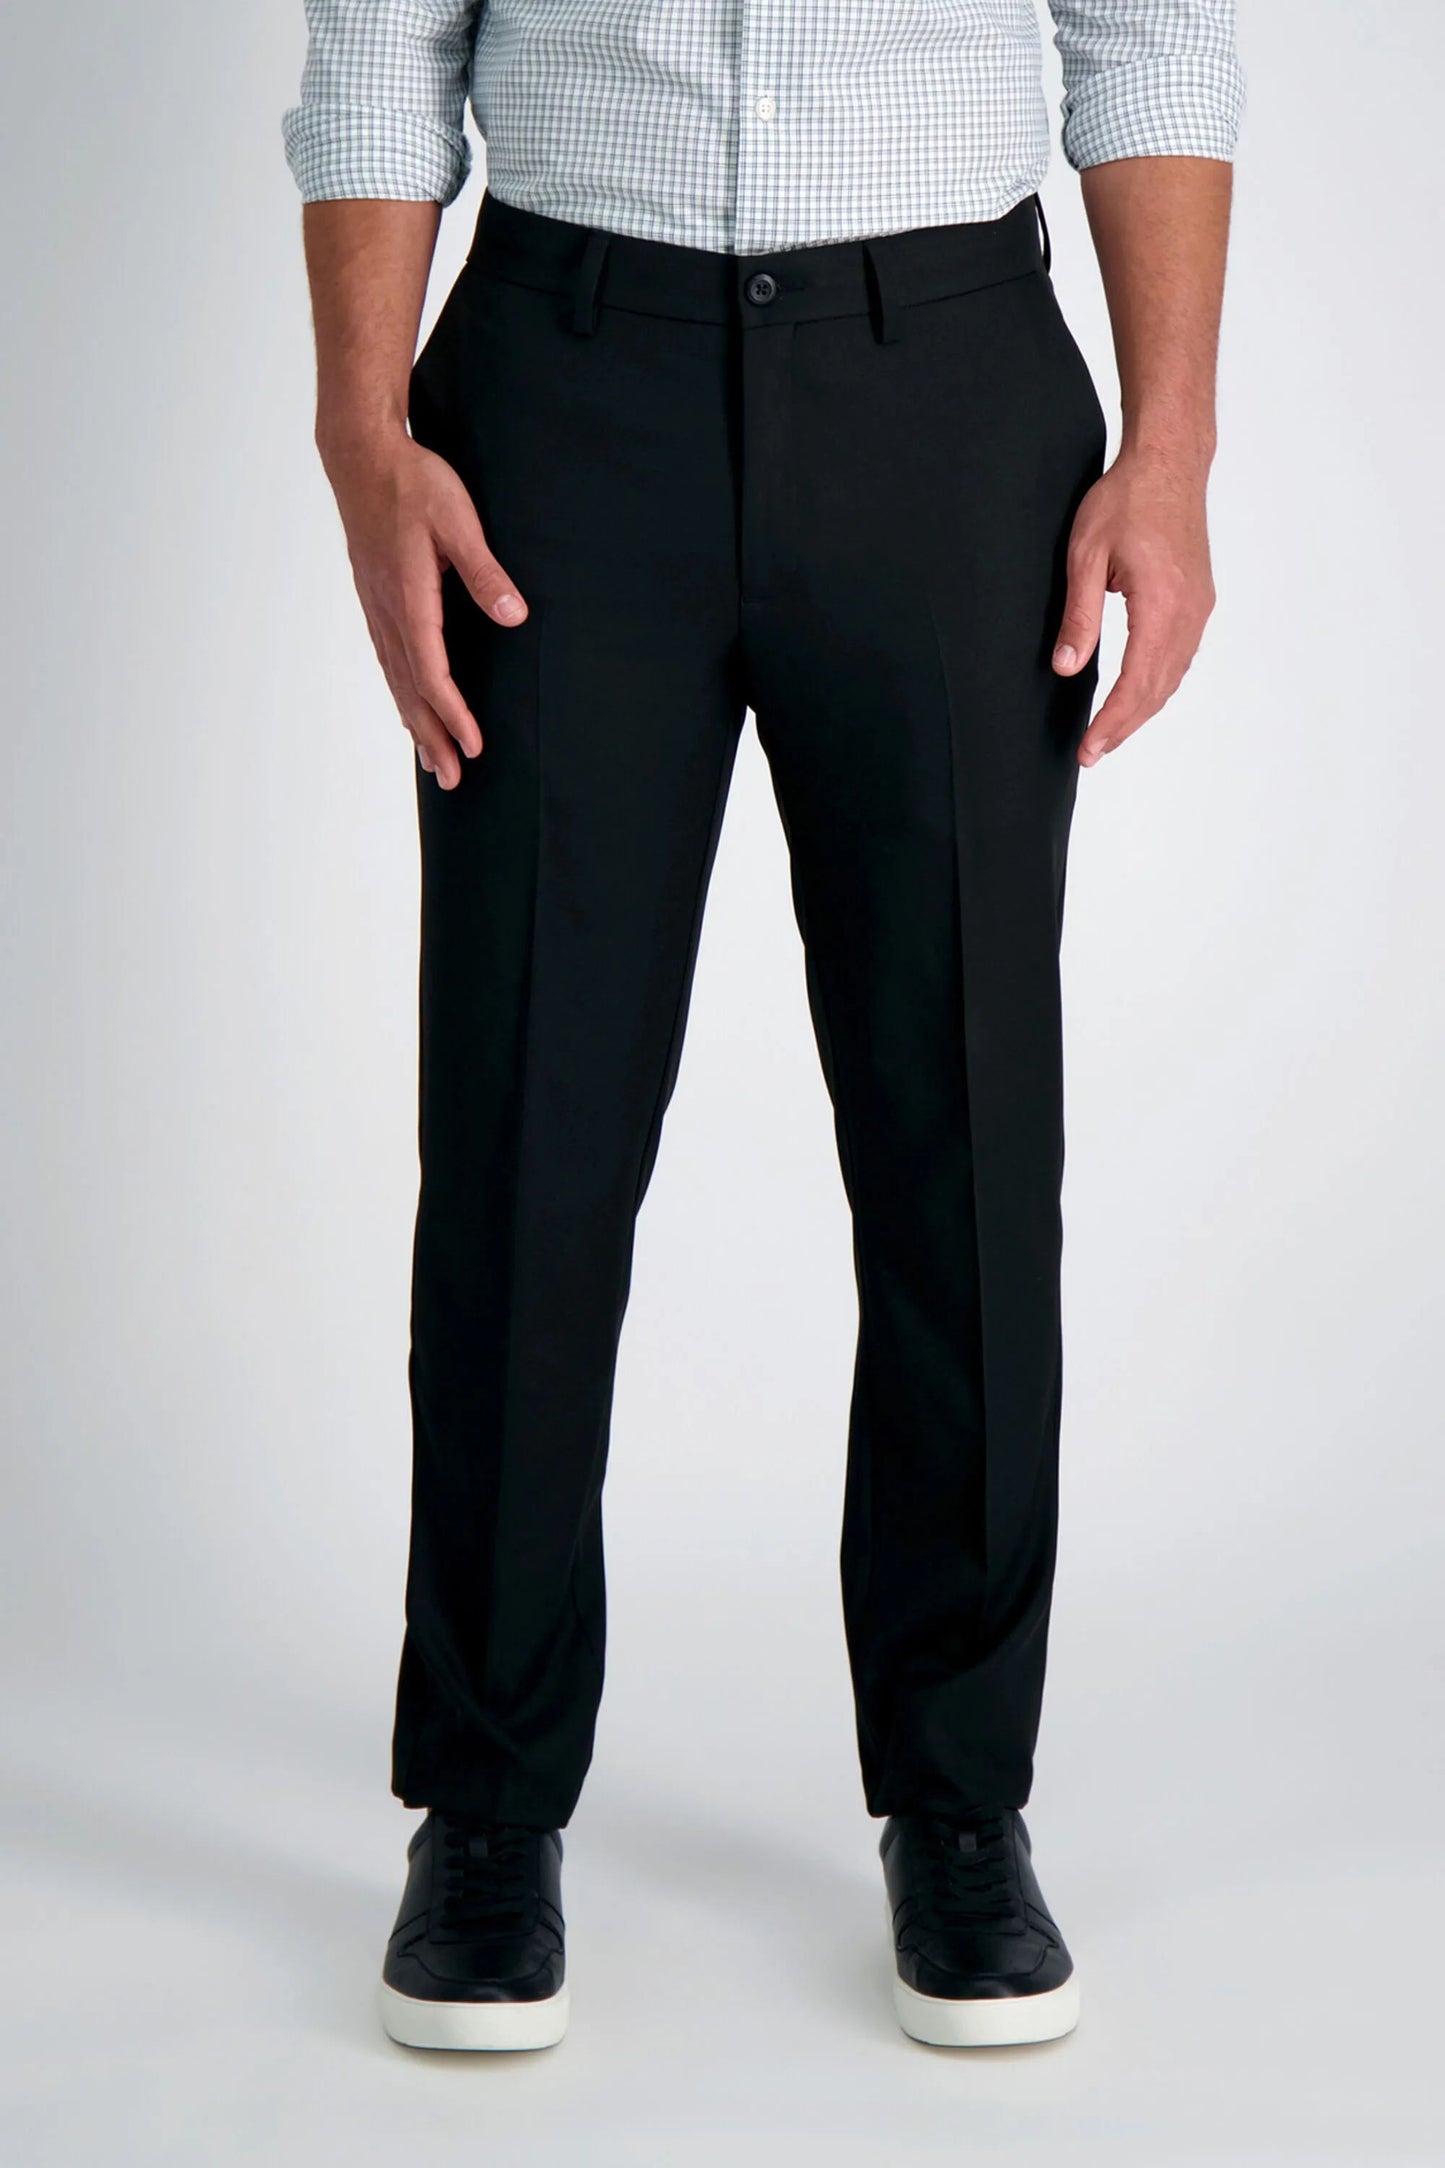 Cool Pro Stretch Flat Front Slim Fit Pant